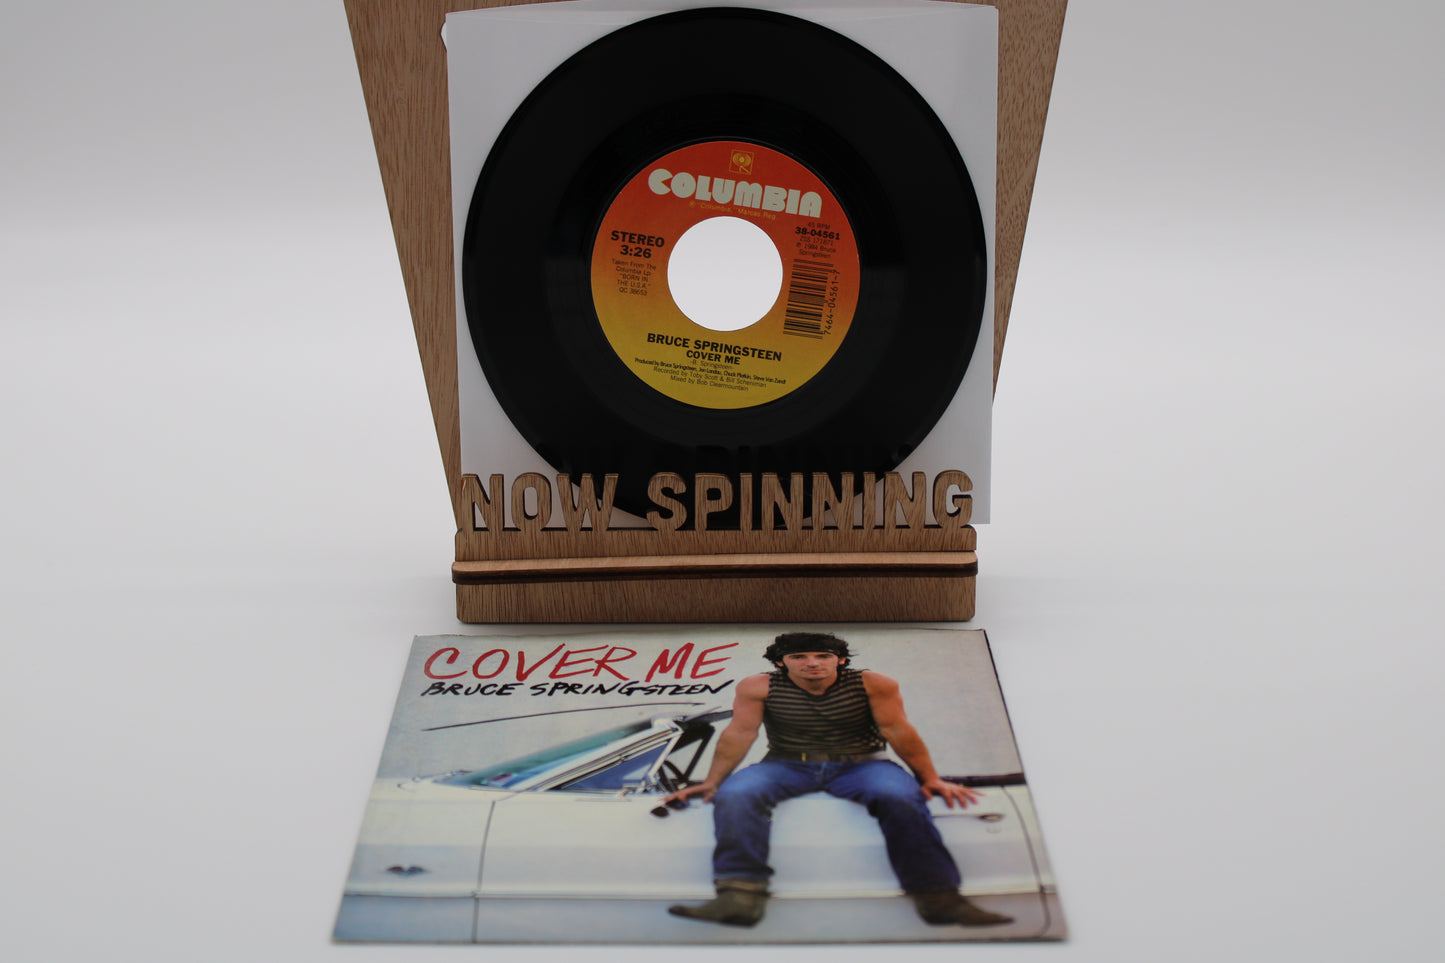 Bruce Springsteen - Cover Me & Jersey Girl  - 45 Record - Original from 1984 NM Condition